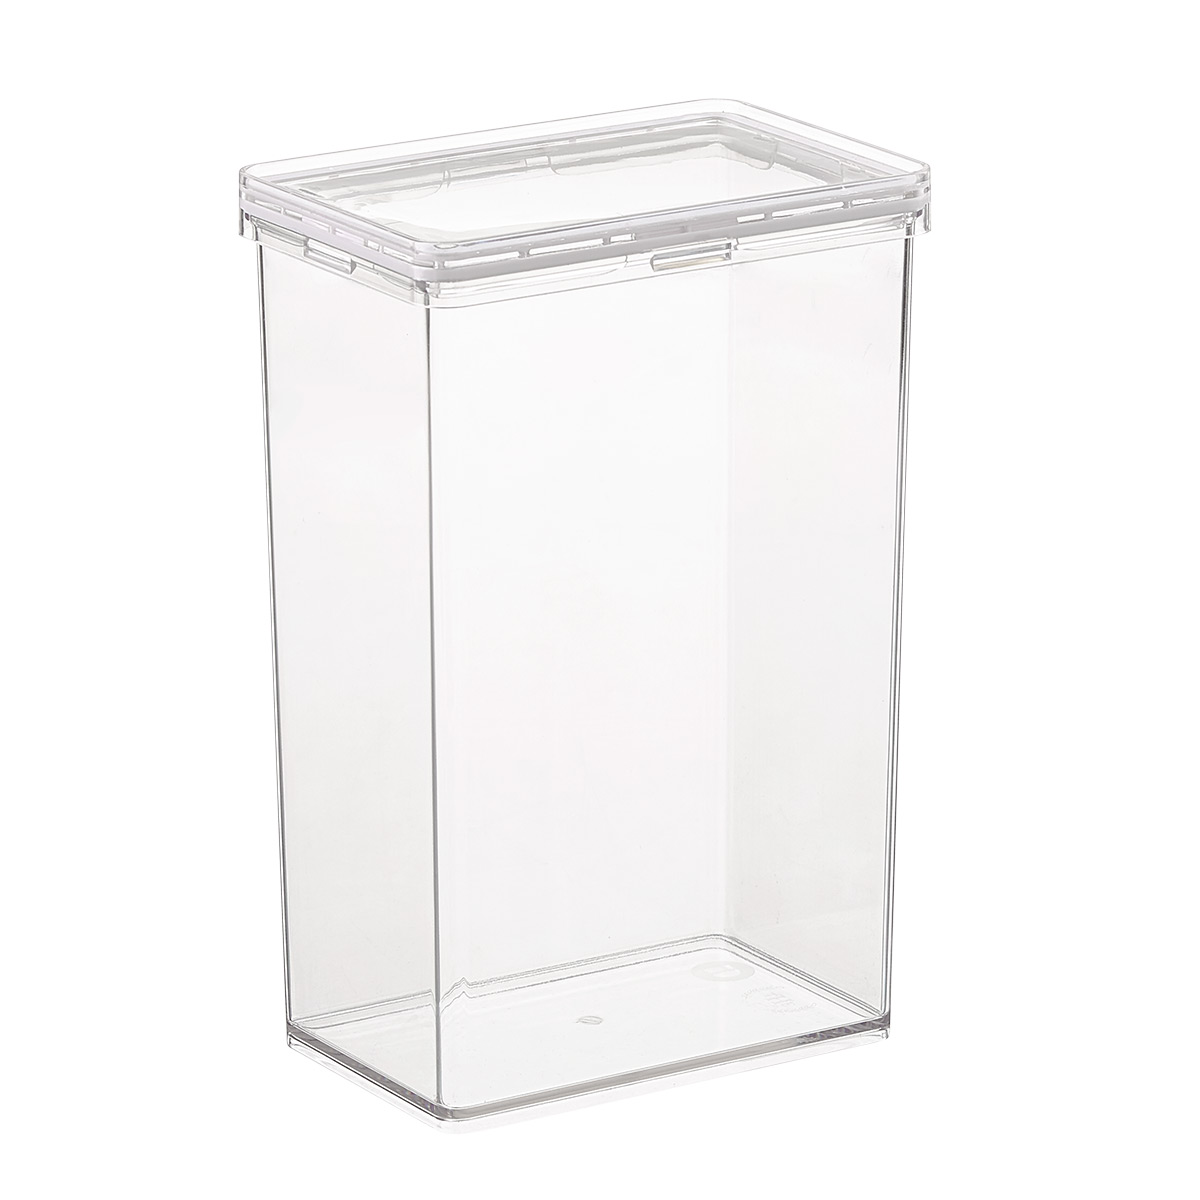 https://www.containerstore.com/catalogimages/364043/10077096-T.H.E.-pantry-canister-larg.jpg